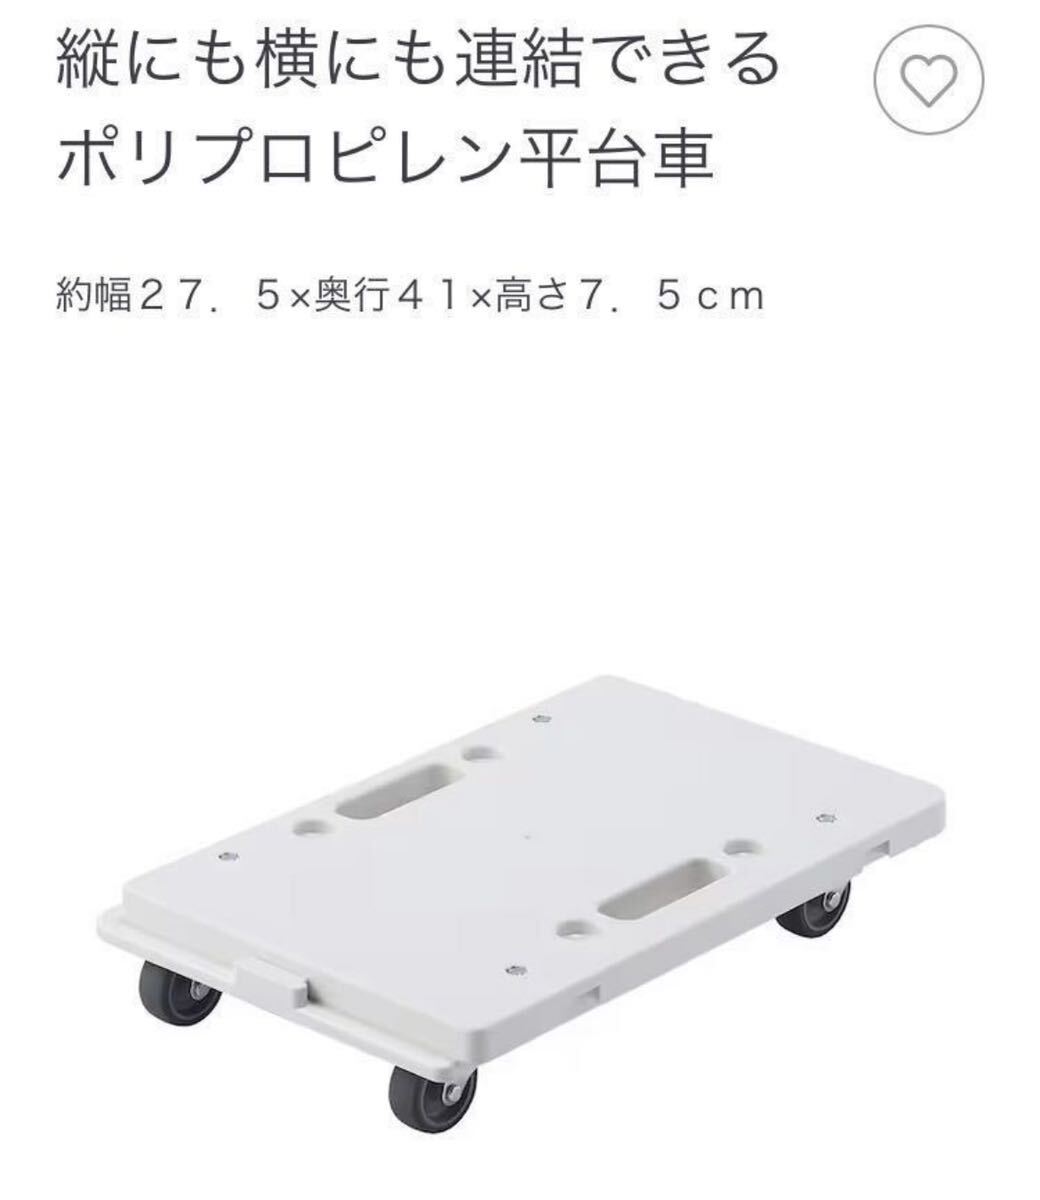  as good as new * Muji Ryohin * poly- Pro pi Len flat cart length also width also connection is possible withstand load 80kg compact sm-z movement kitchen living pushed go in entranceway white 